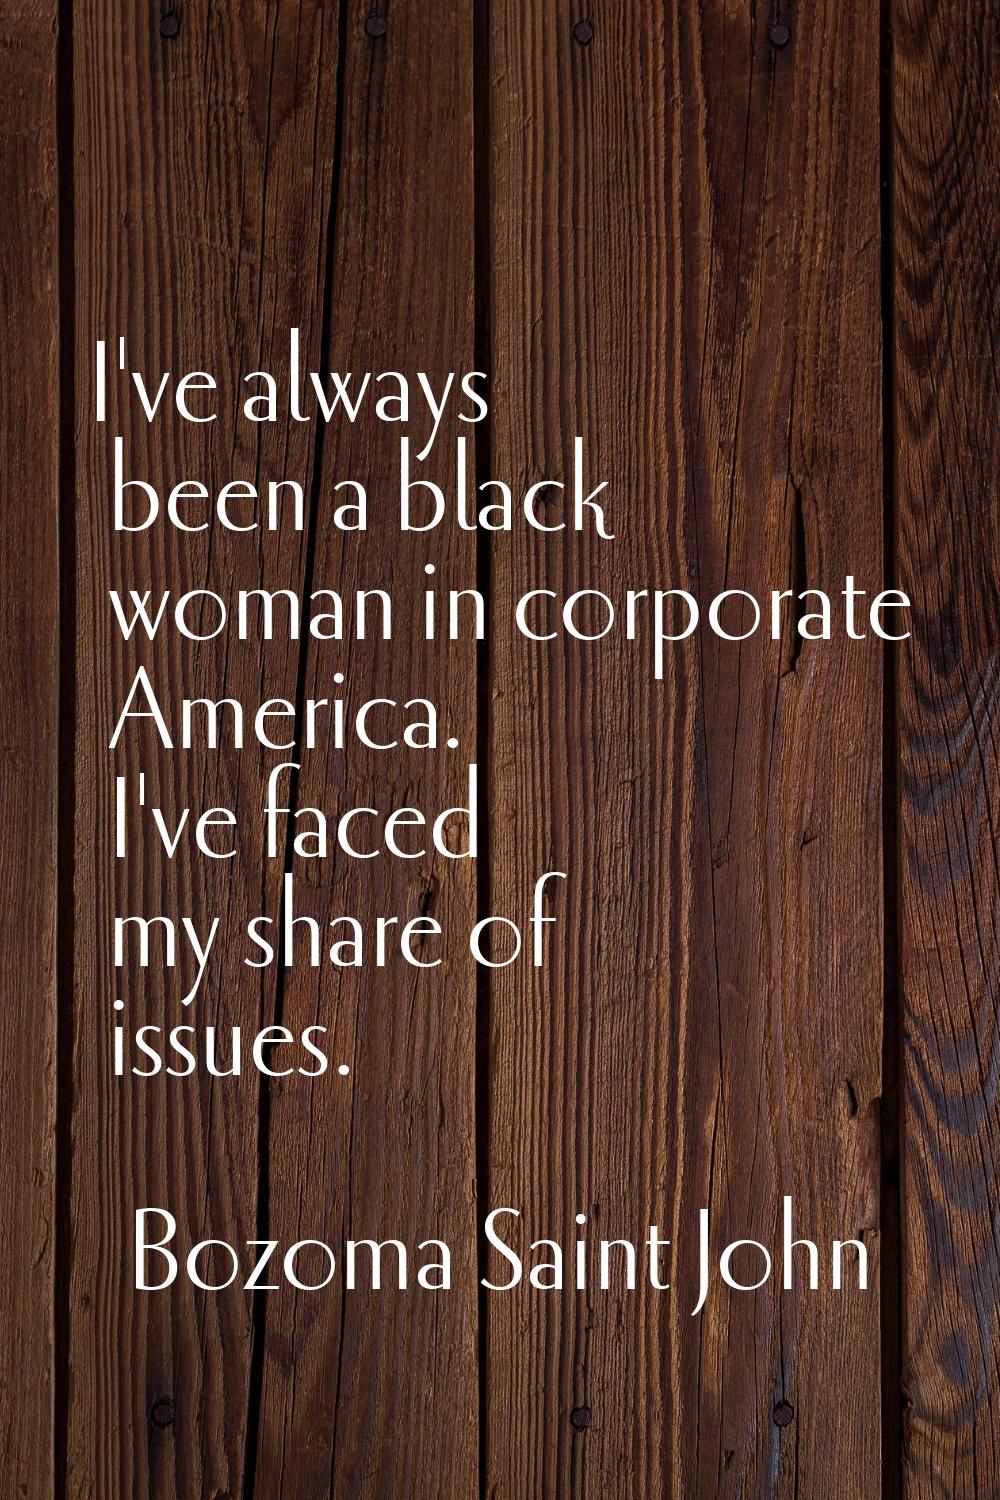 I've always been a black woman in corporate America. I've faced my share of issues.